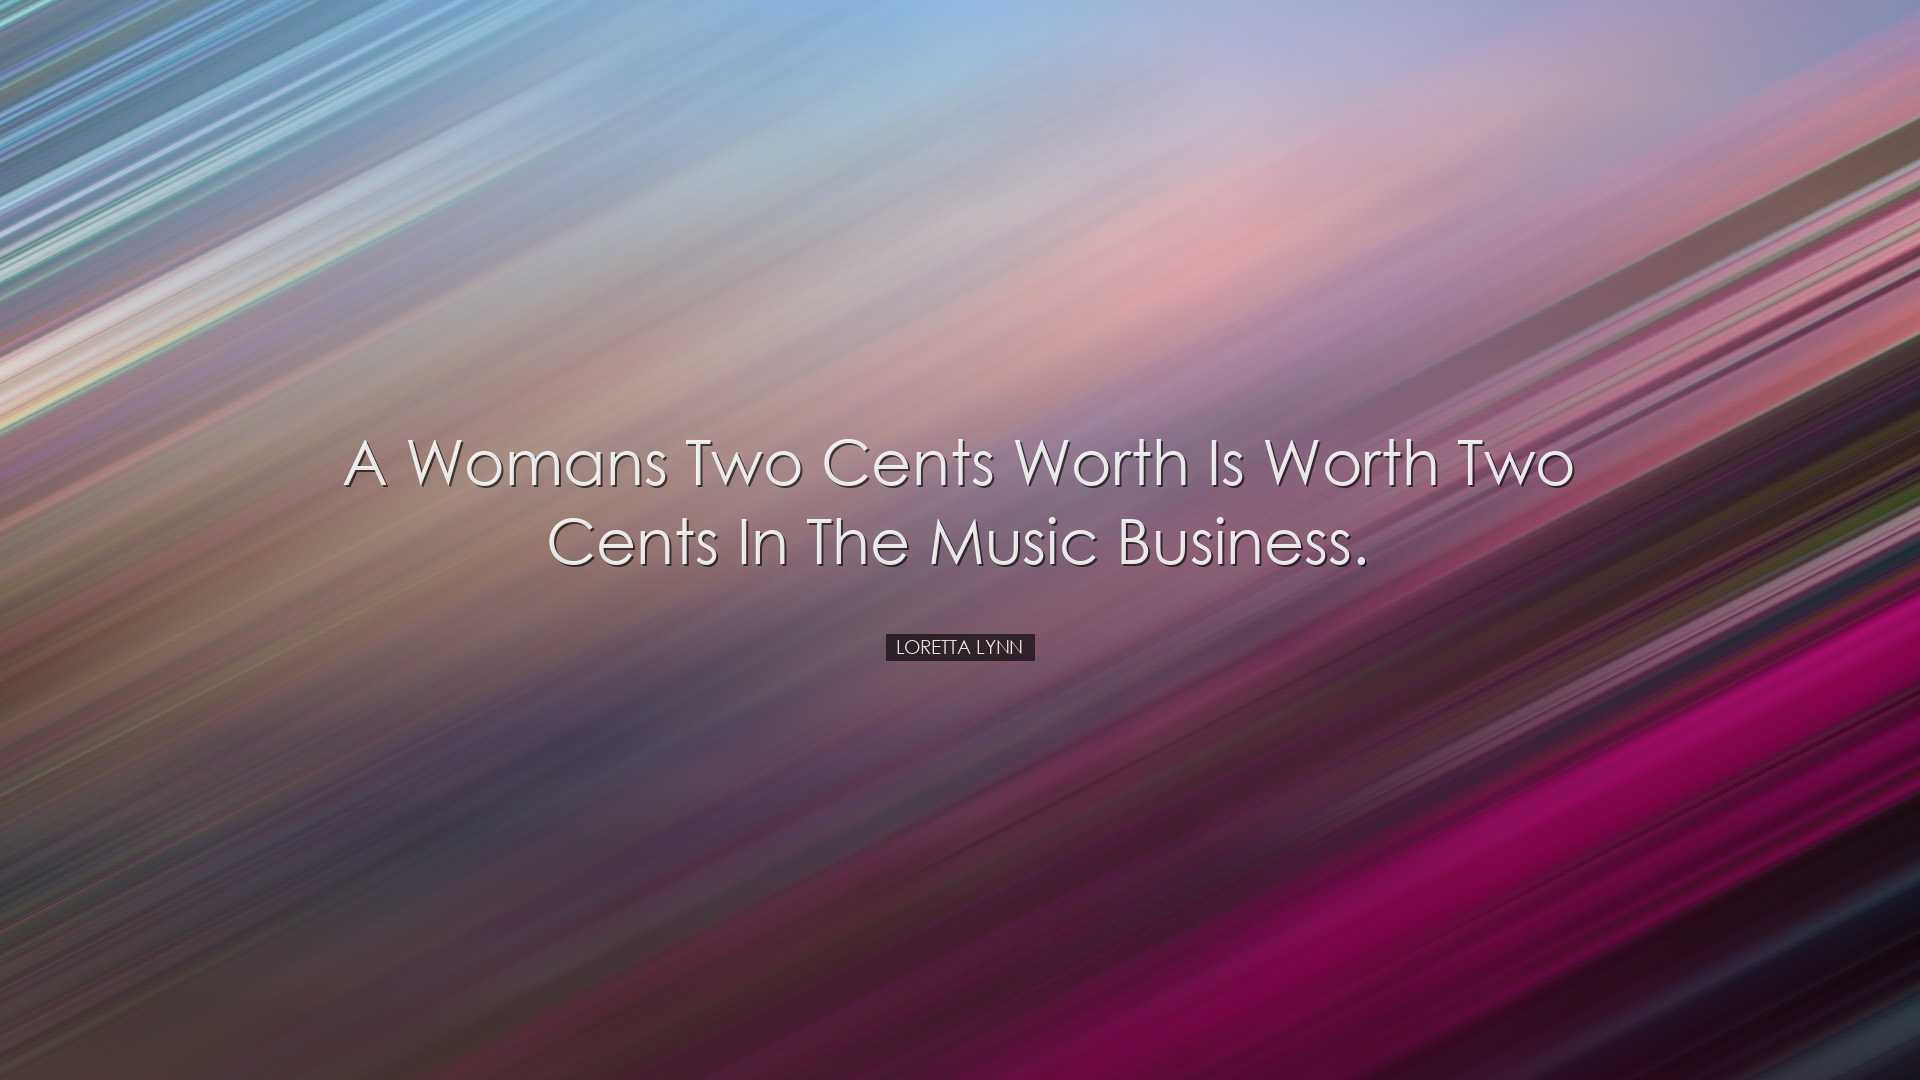 A womans two cents worth is worth two cents in the music business.